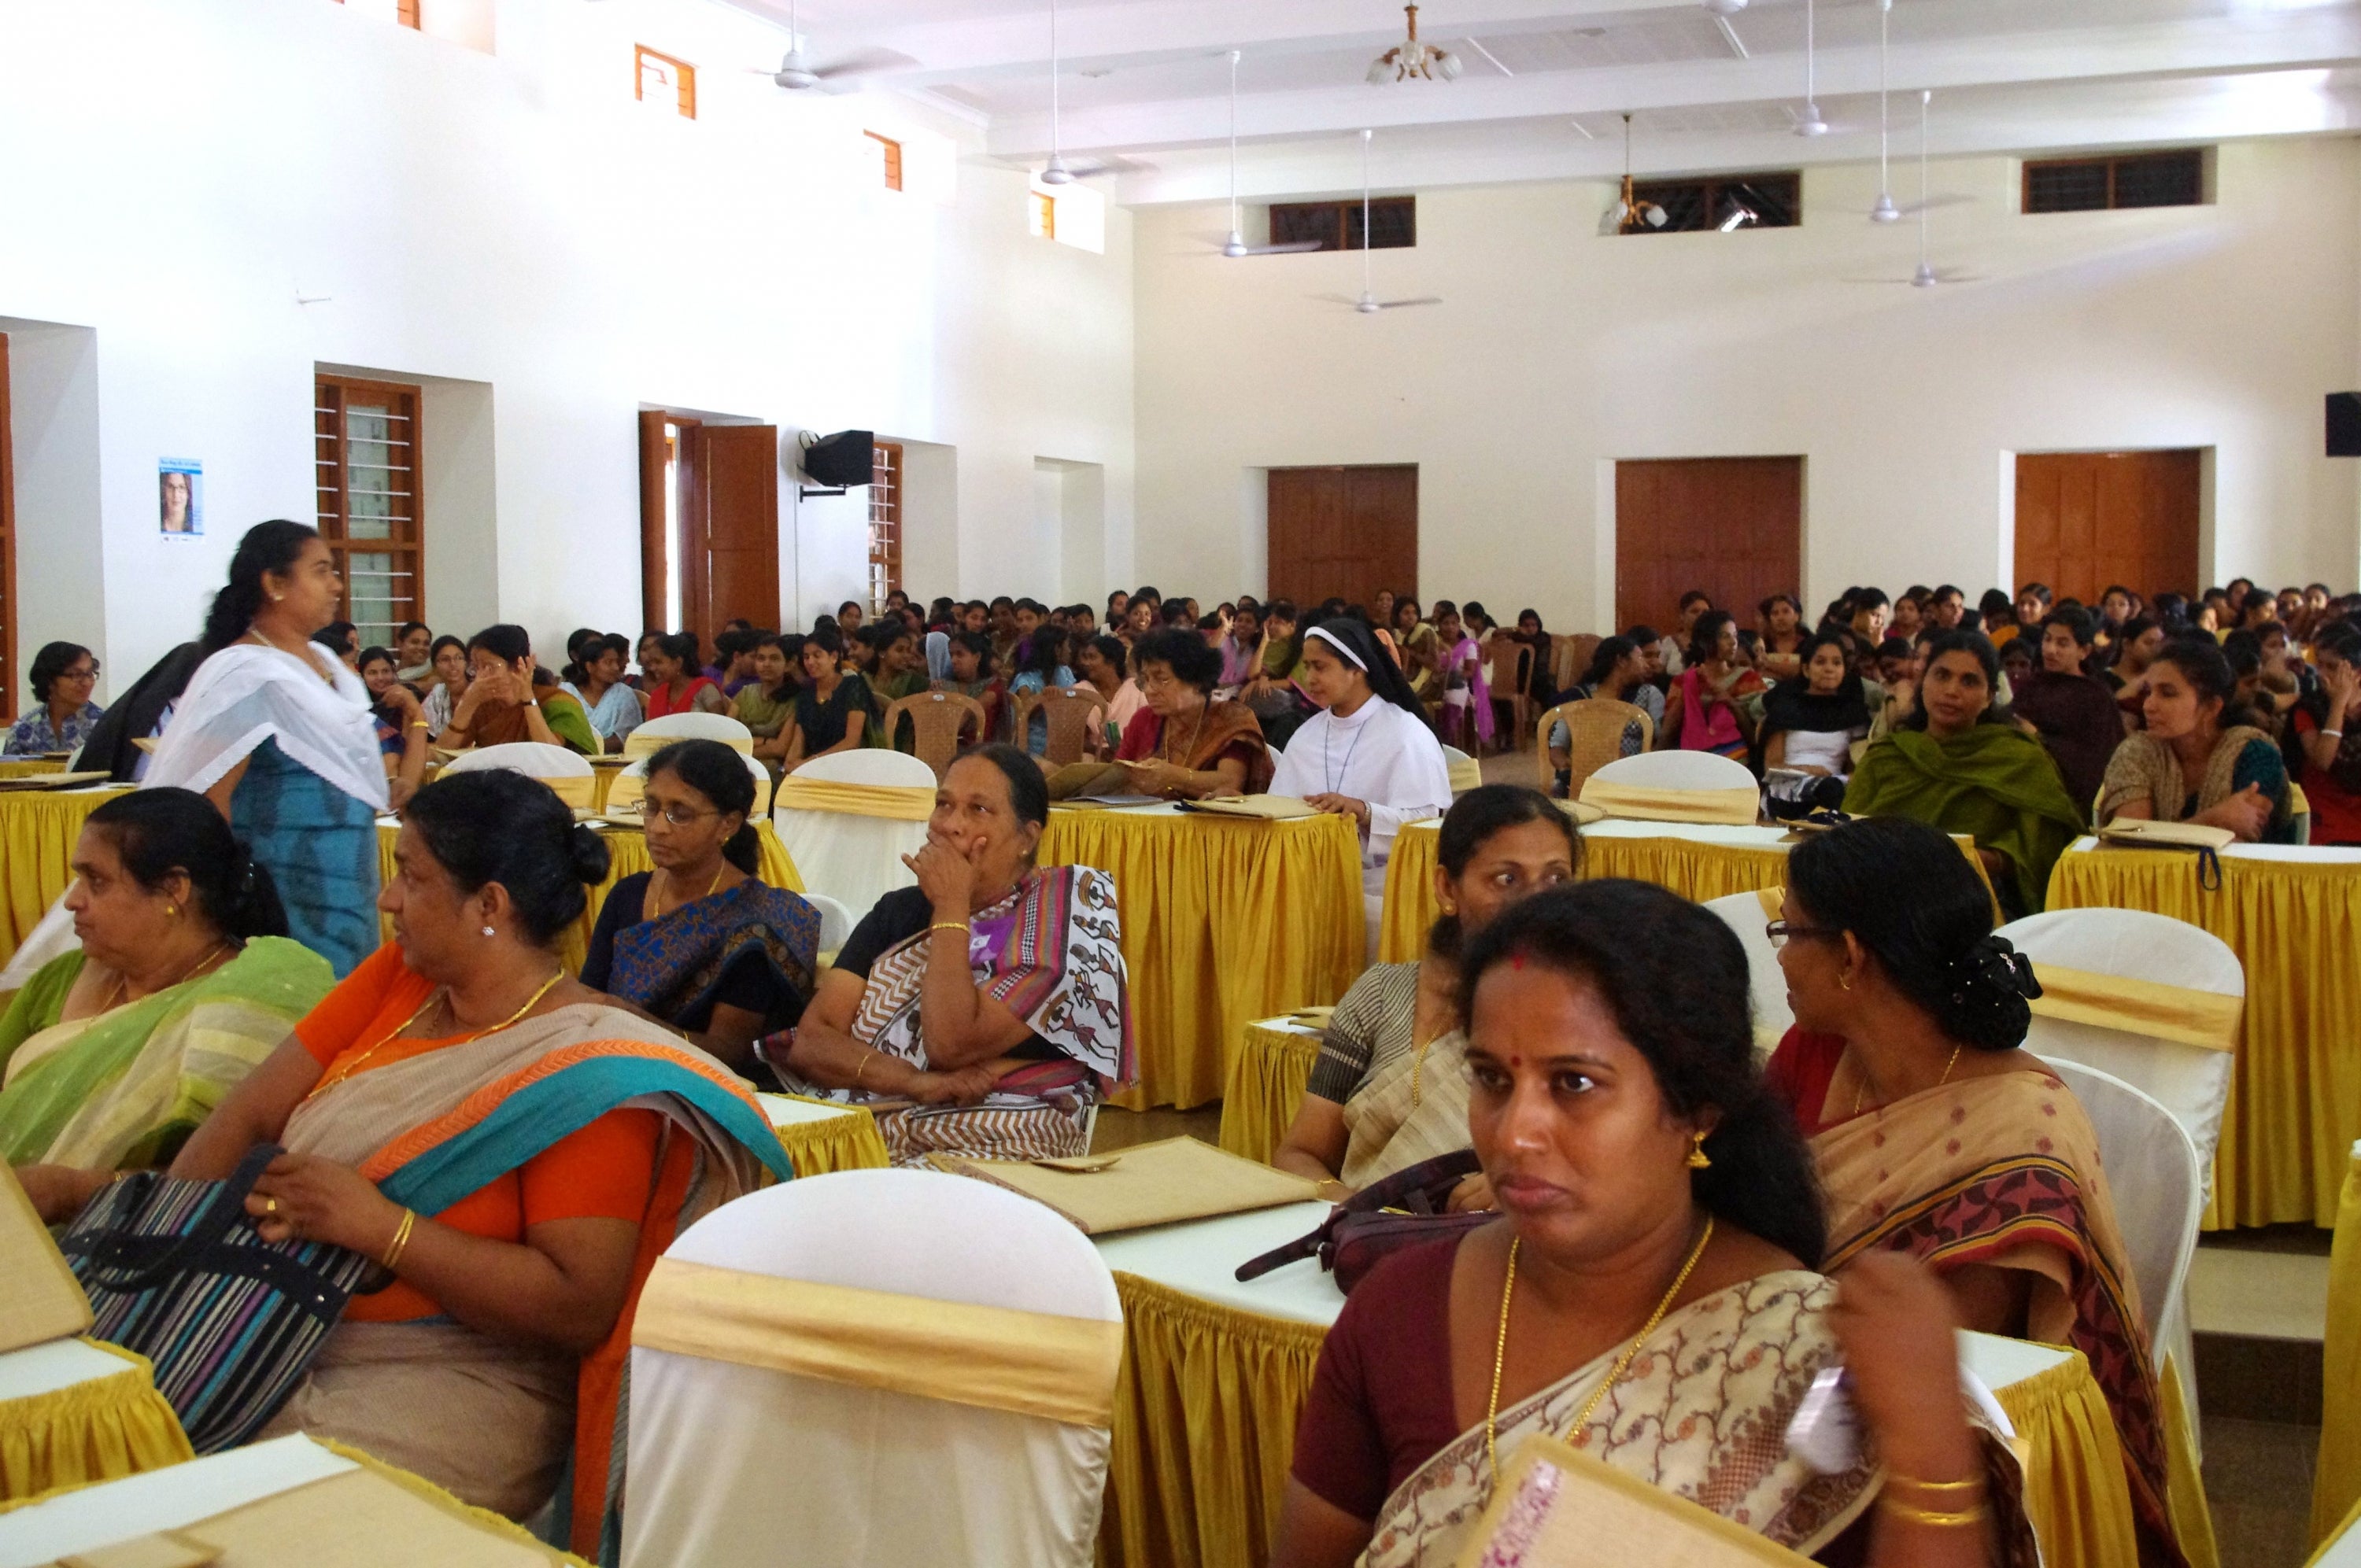 An audience of Indian women at the conference